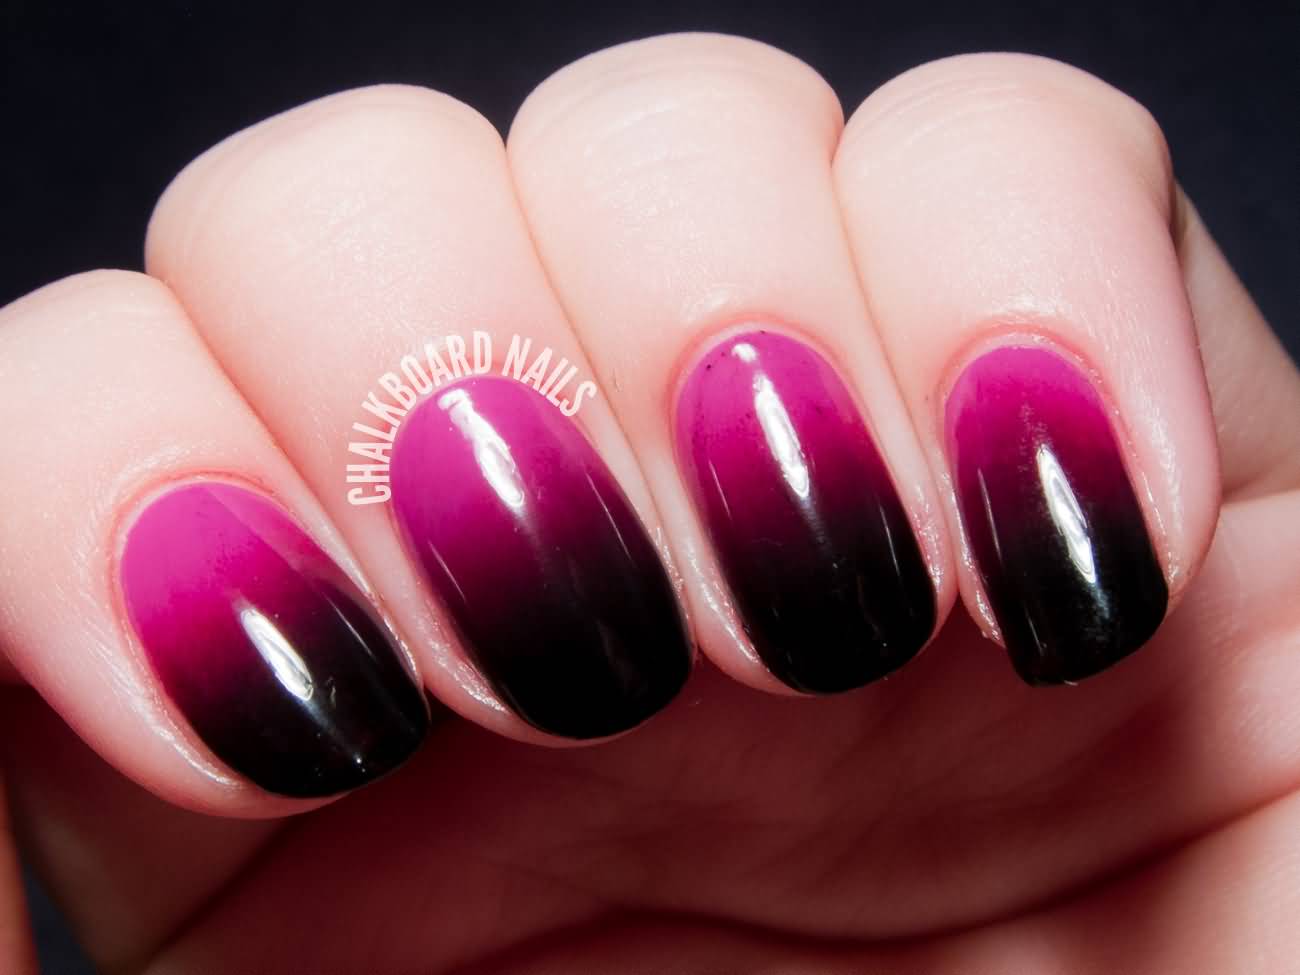 7. Grey and Pink Gradient Nails - wide 2